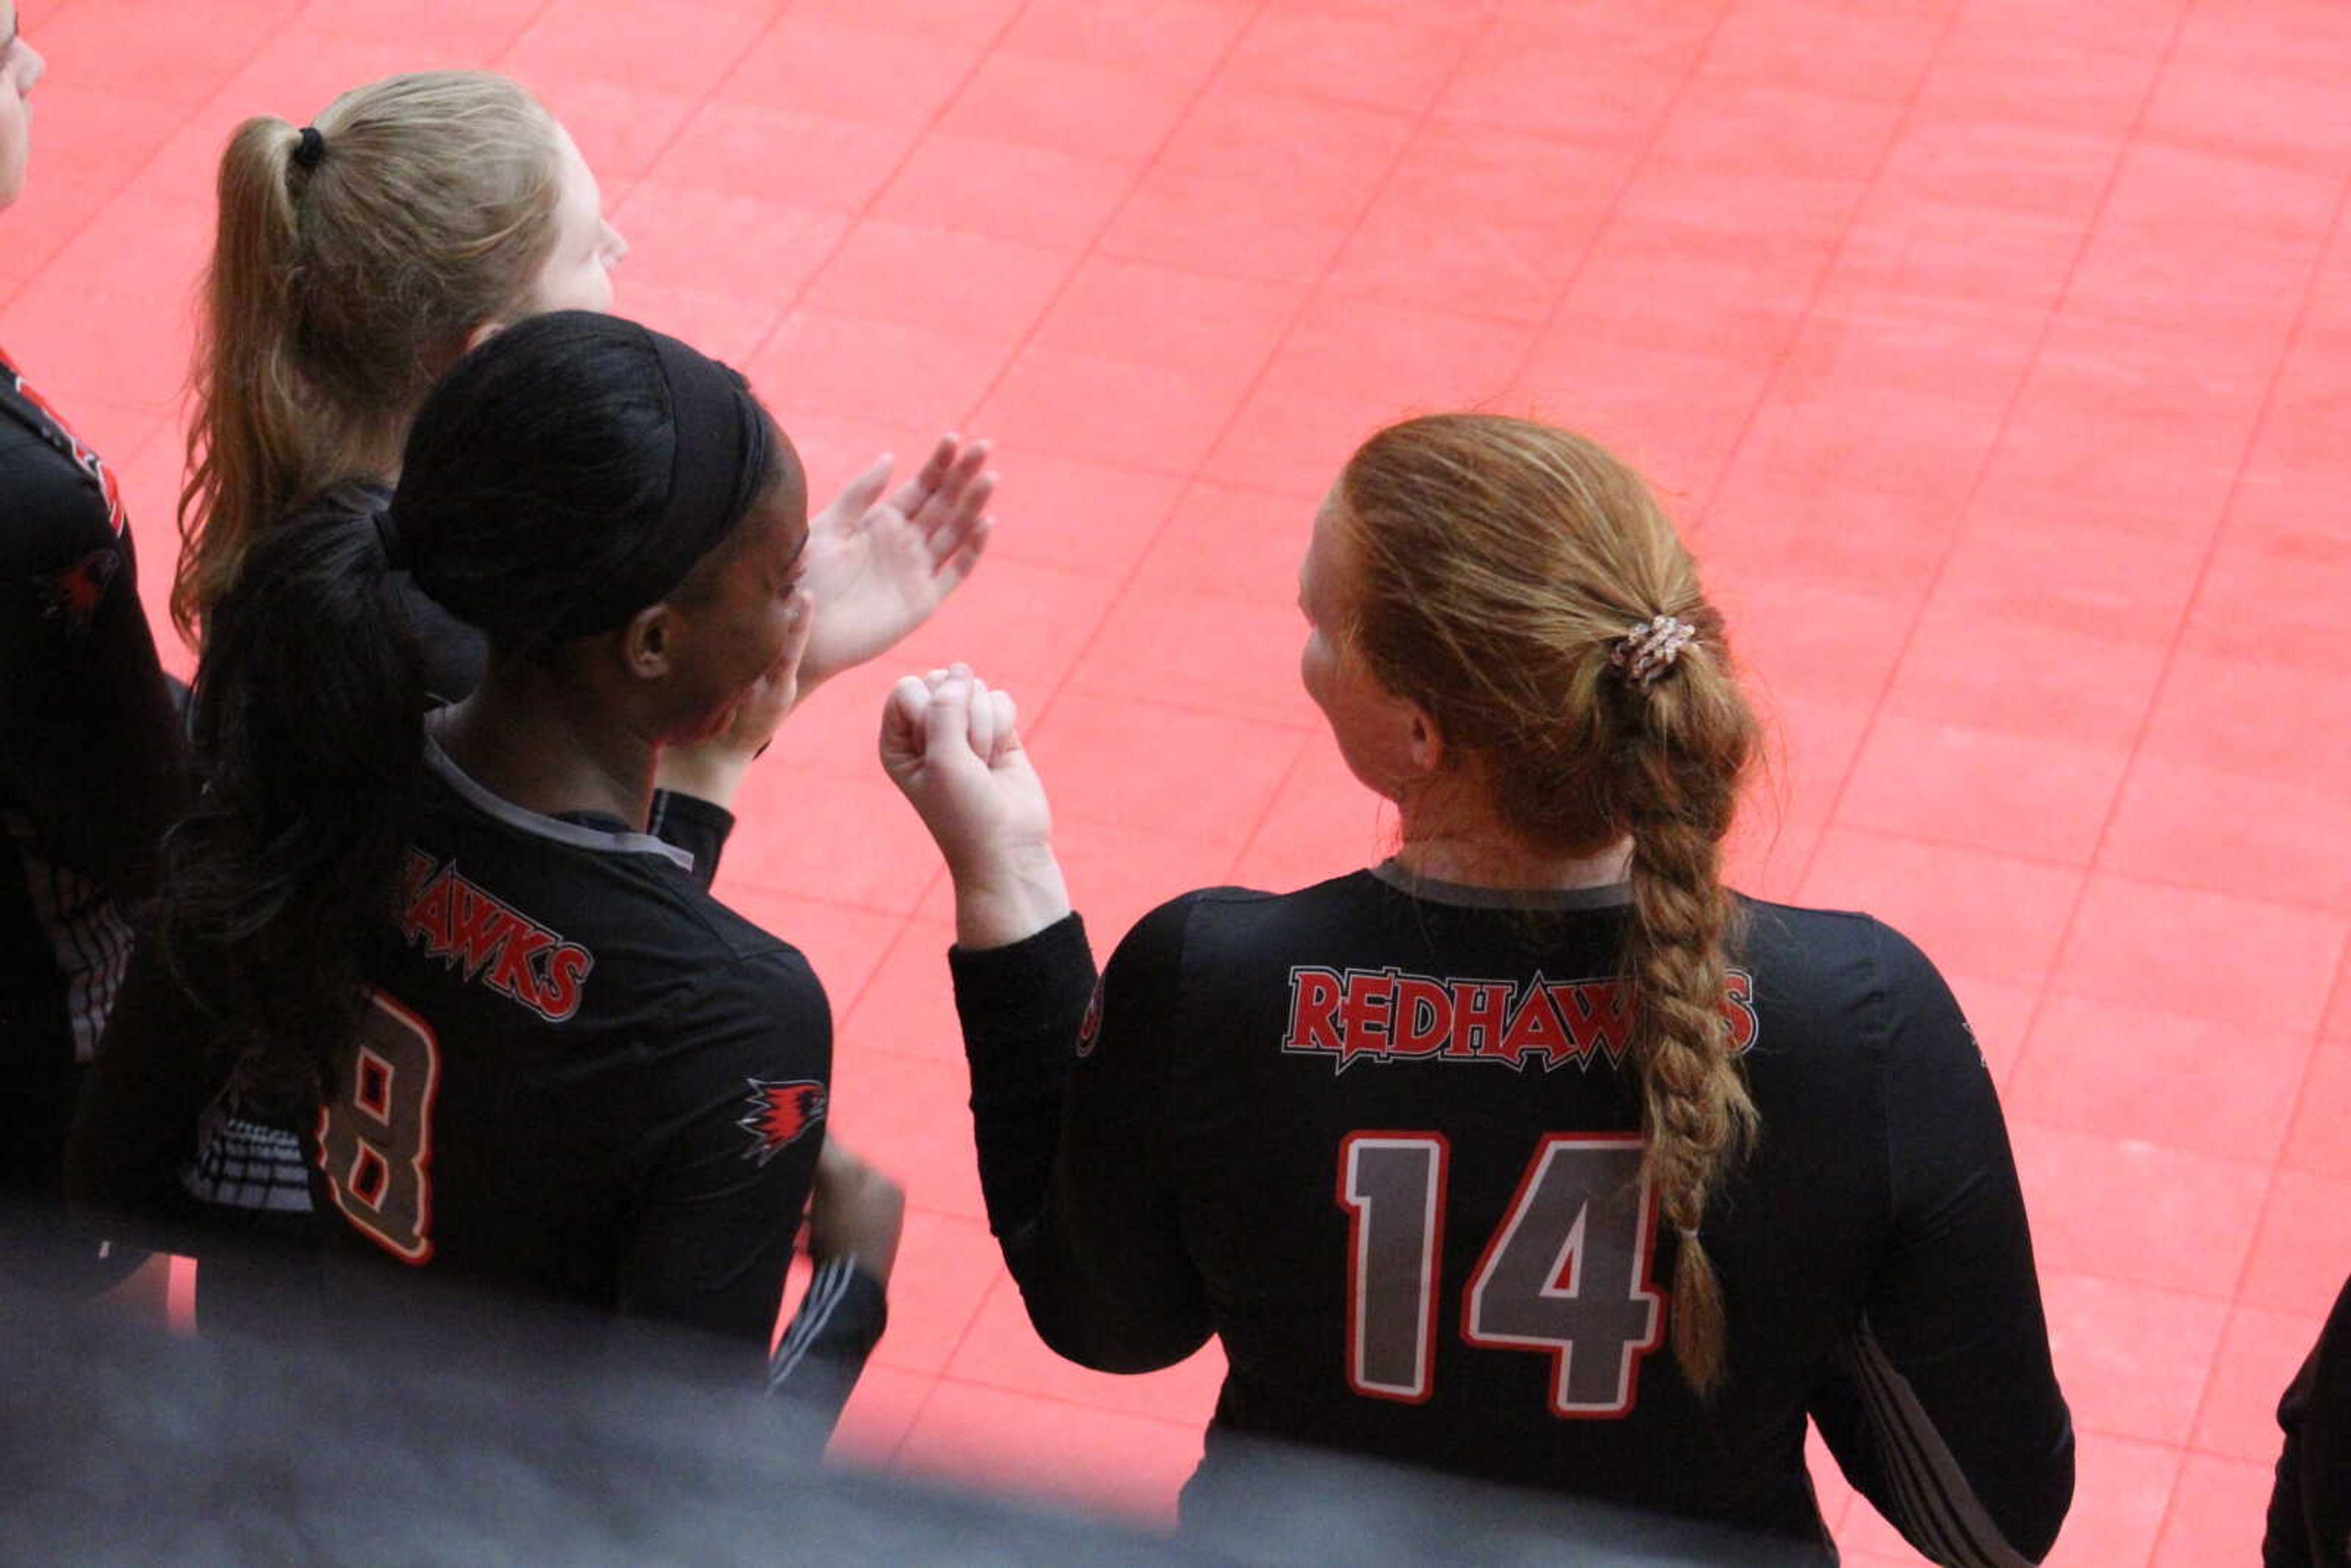 Talia Gouard (middle) stands with her teammates during a match at Houck Fieldhouse in Cape Girardeau.